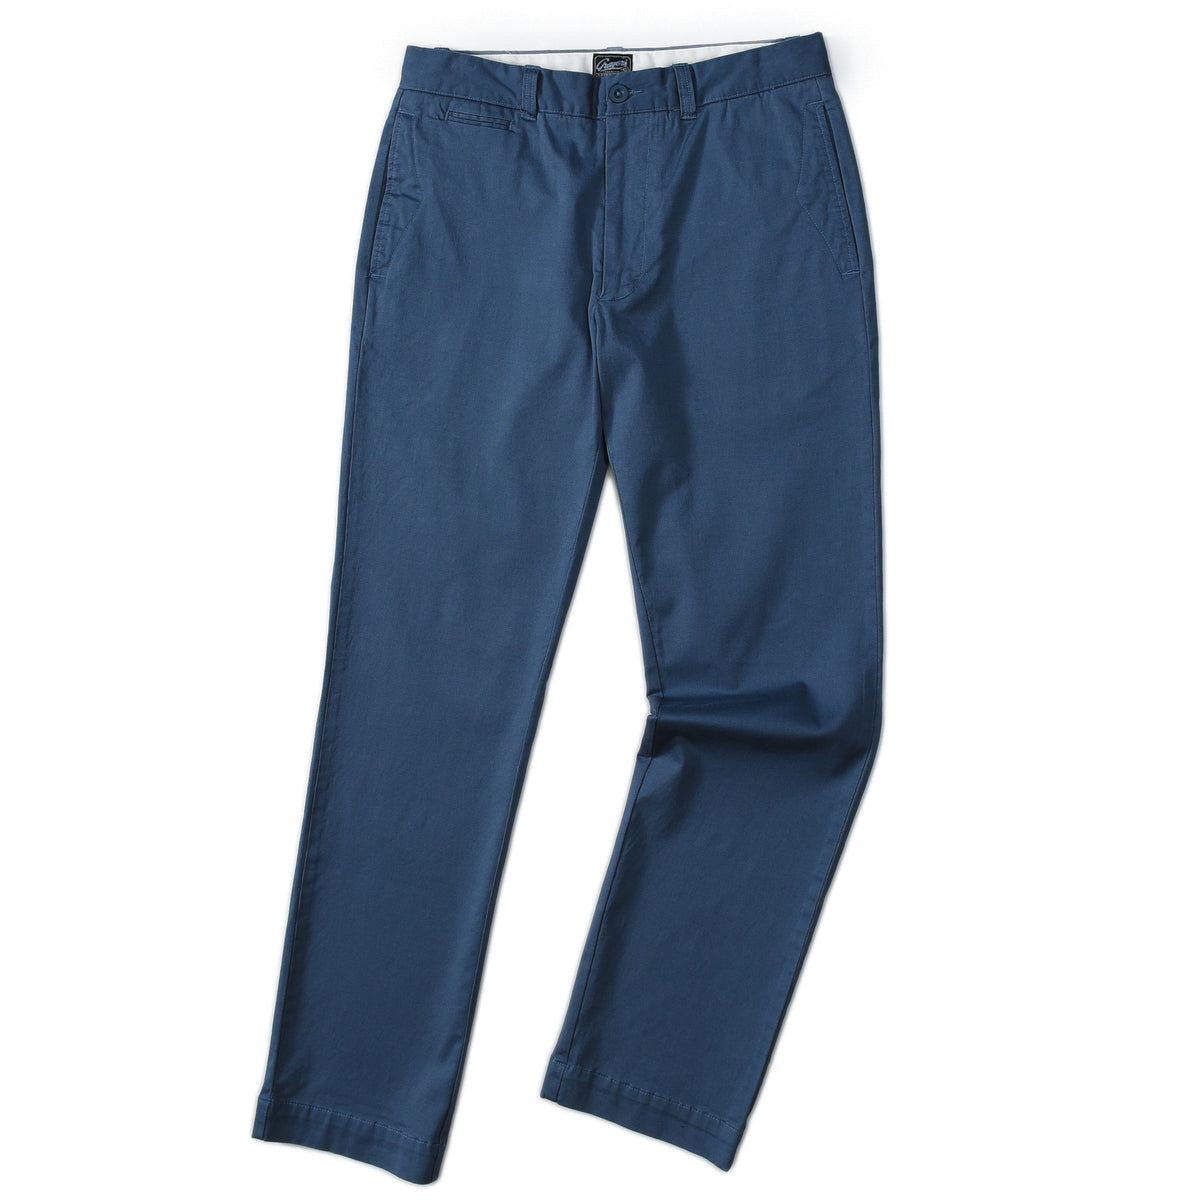 Newport Stretch Modern Fit Chino - Med Blue – Grayers